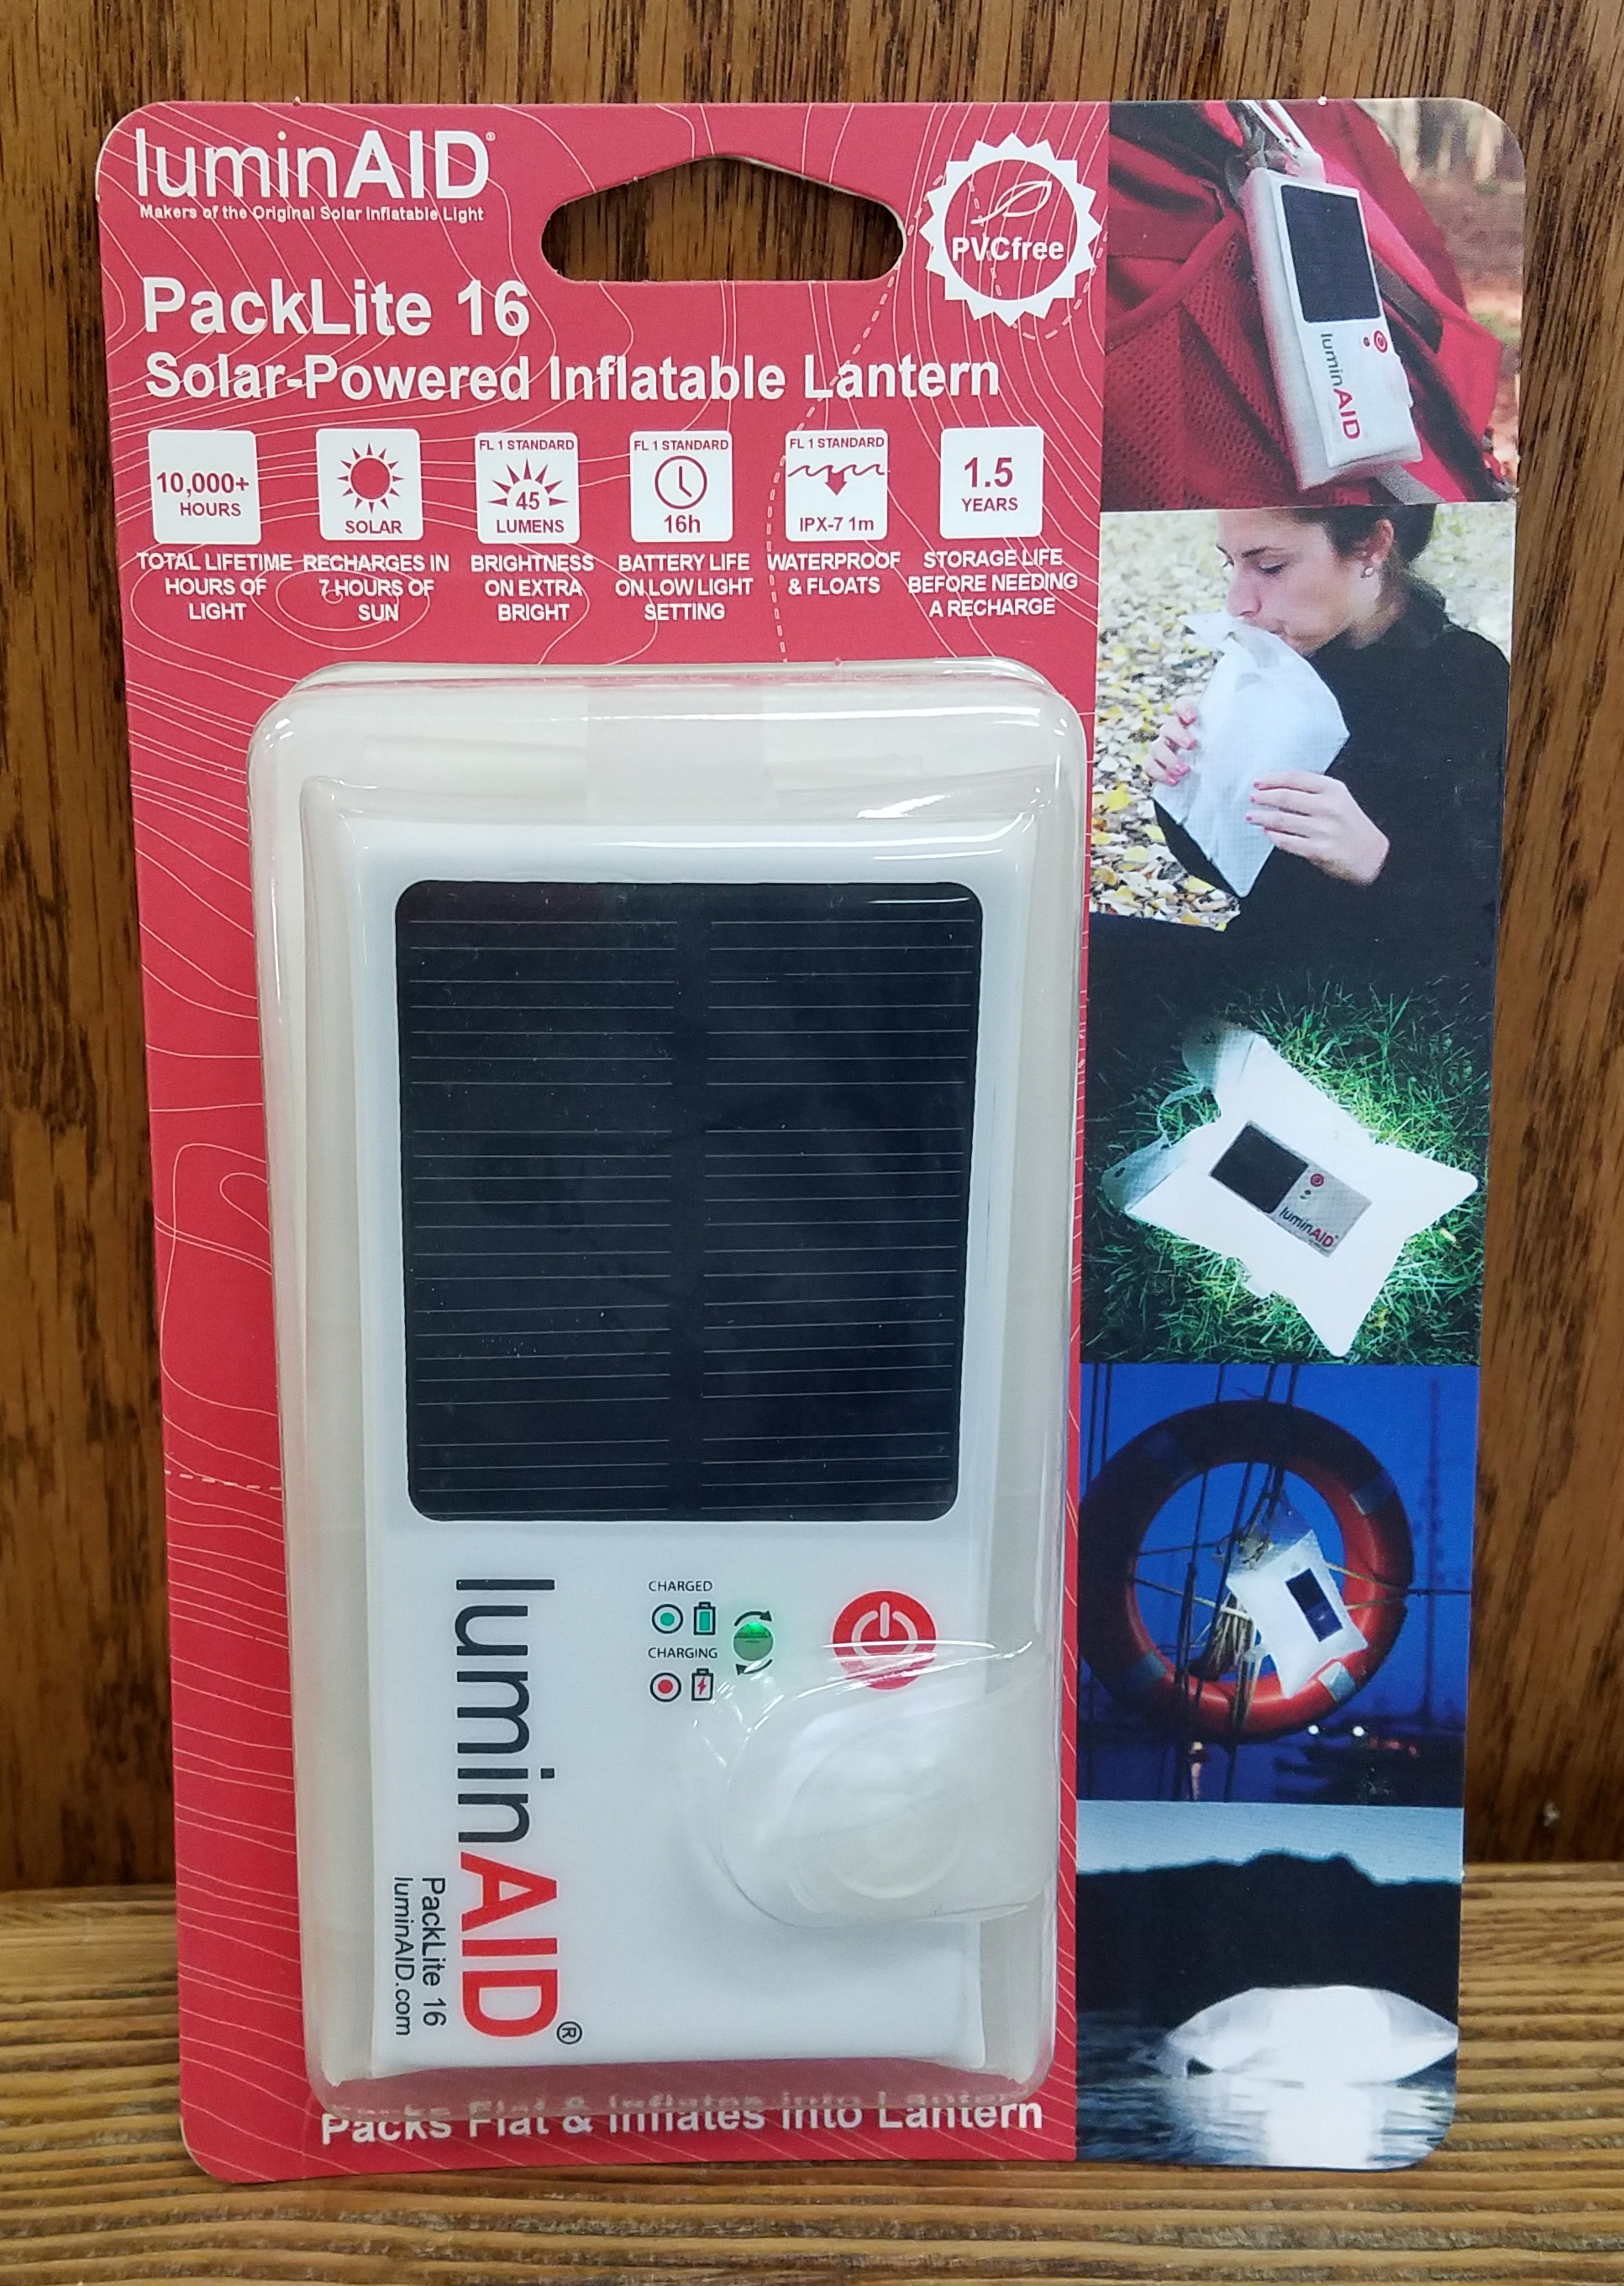 LuminAID PackLite 16 Solar Powered Inflatable Lantern - First My Family - A  Disaster Preparedness Company